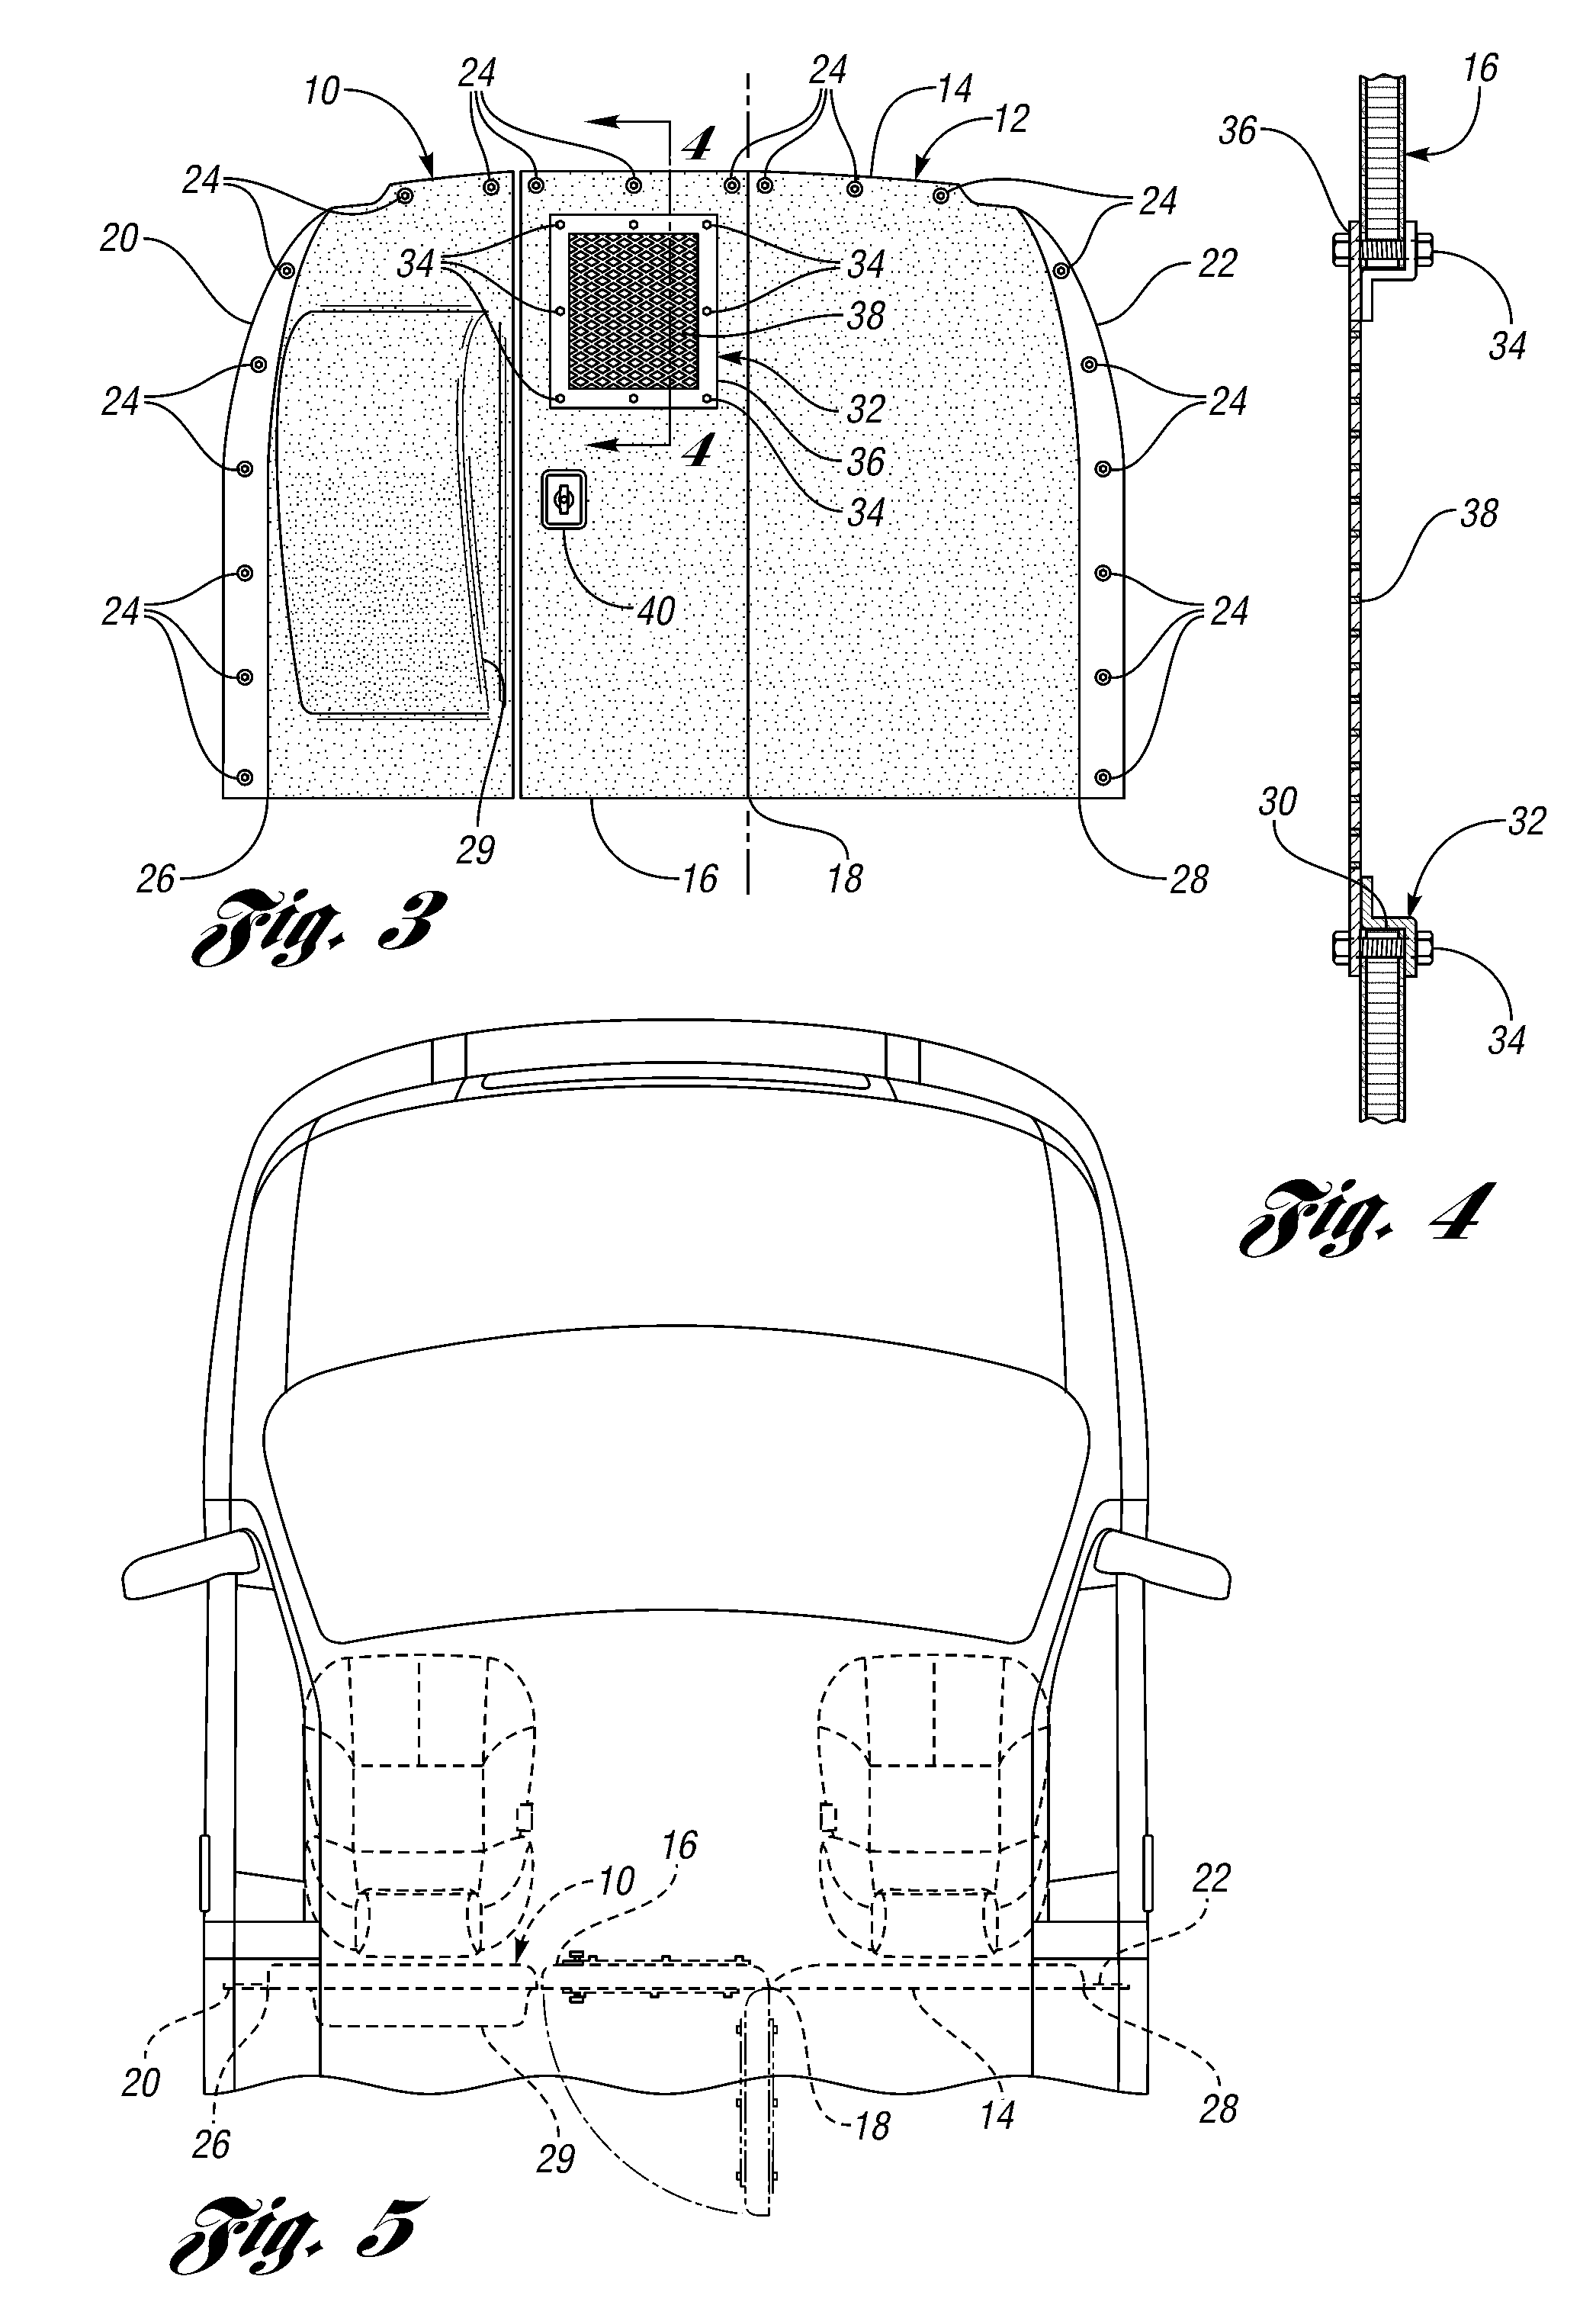 Kit and bulkhead assembly for cargo vehicles